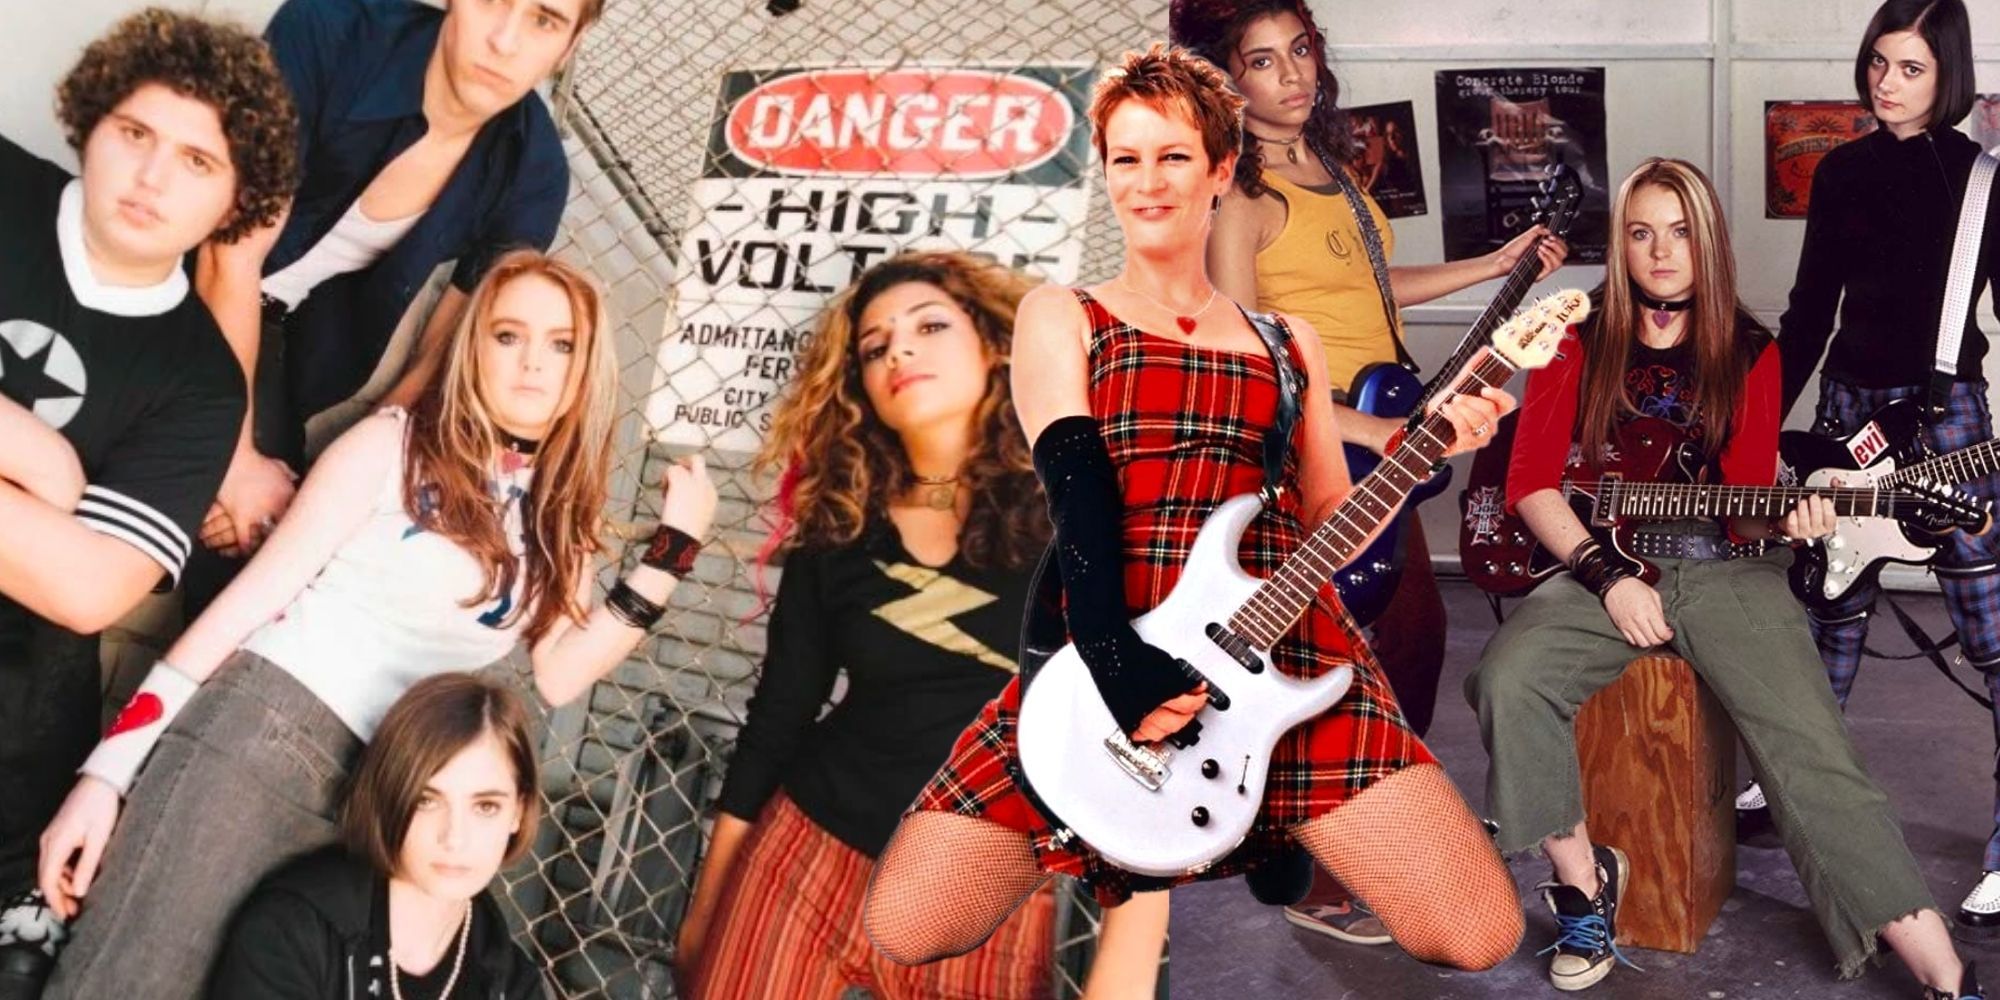 Freaky Friday Lindsay Lohan and Jamie Lee Curtis and the movie band Pink Slips with Guitars